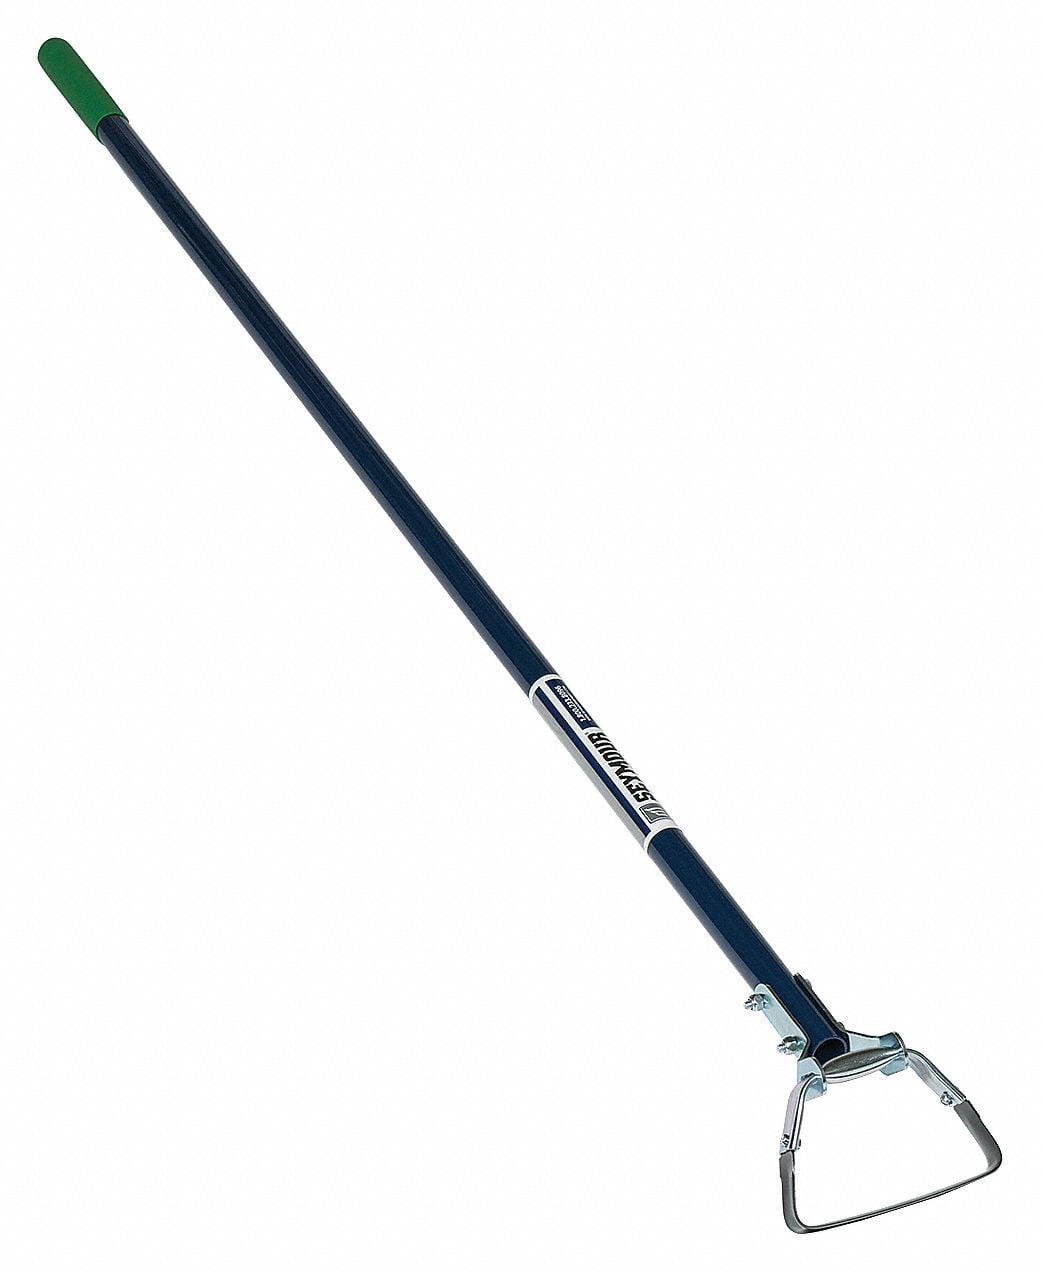 Flexrake 1000A Hula-Ho Weeder Cultivator with 54" Aluminum Handle 